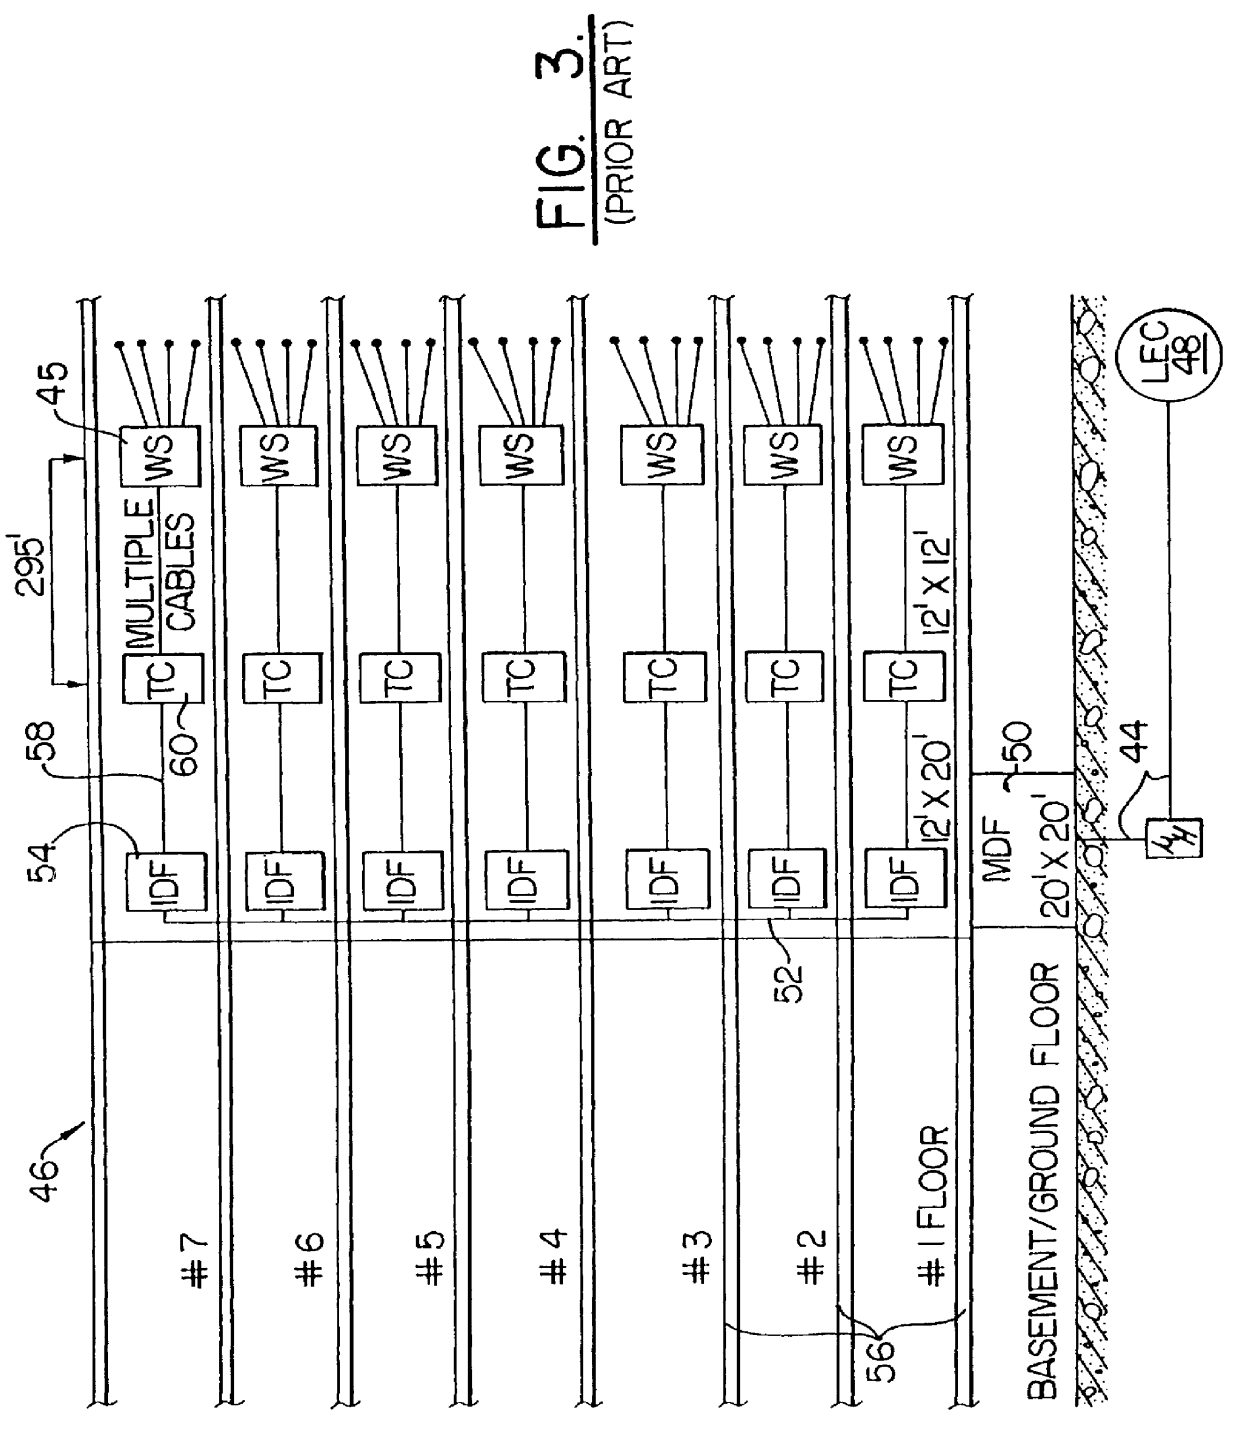 Communications cable interconnection apparatus and associated method for an open office architecture